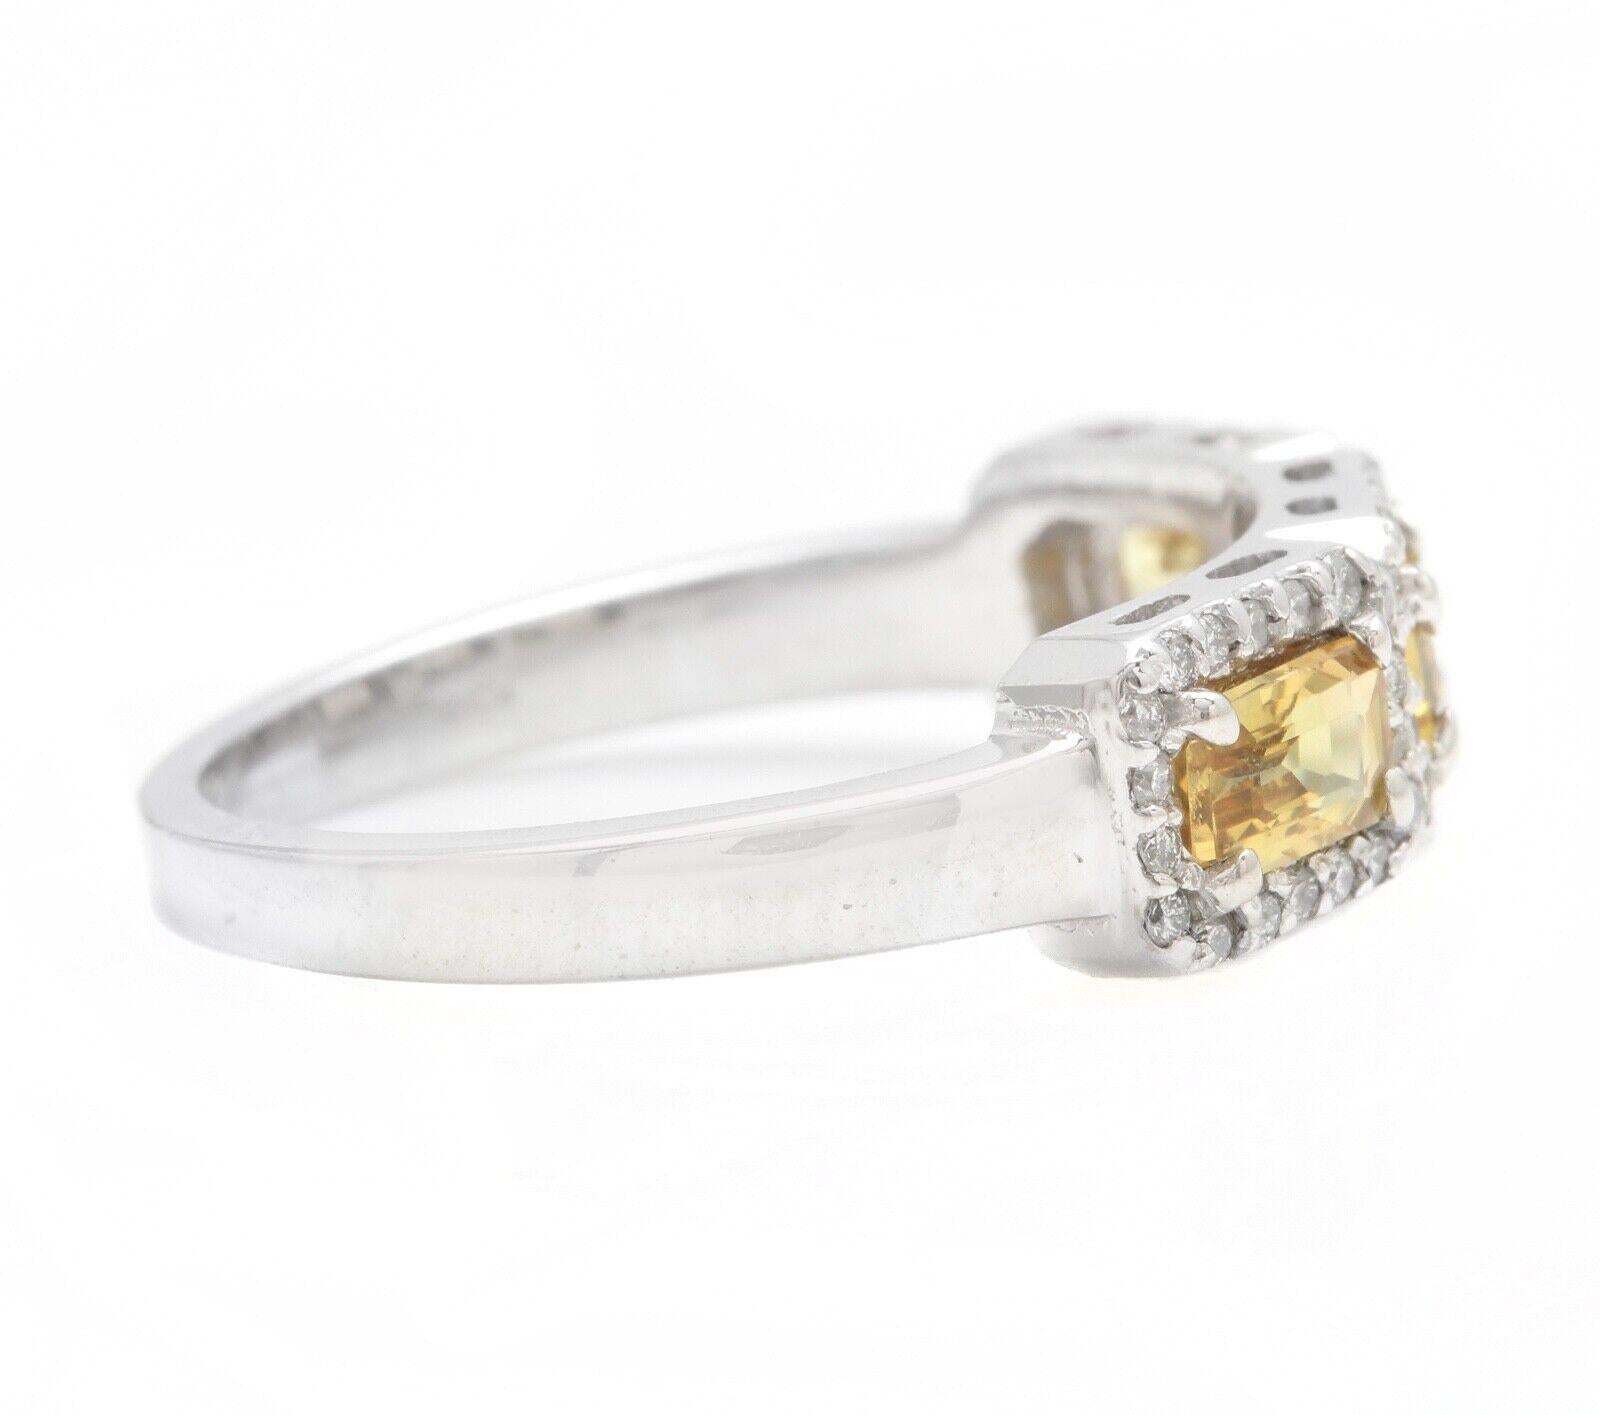 Mixed Cut 1.35 Ct Exquisite Natural Yellow Sapphire and Diamond 14K Solid White Gold Ring For Sale